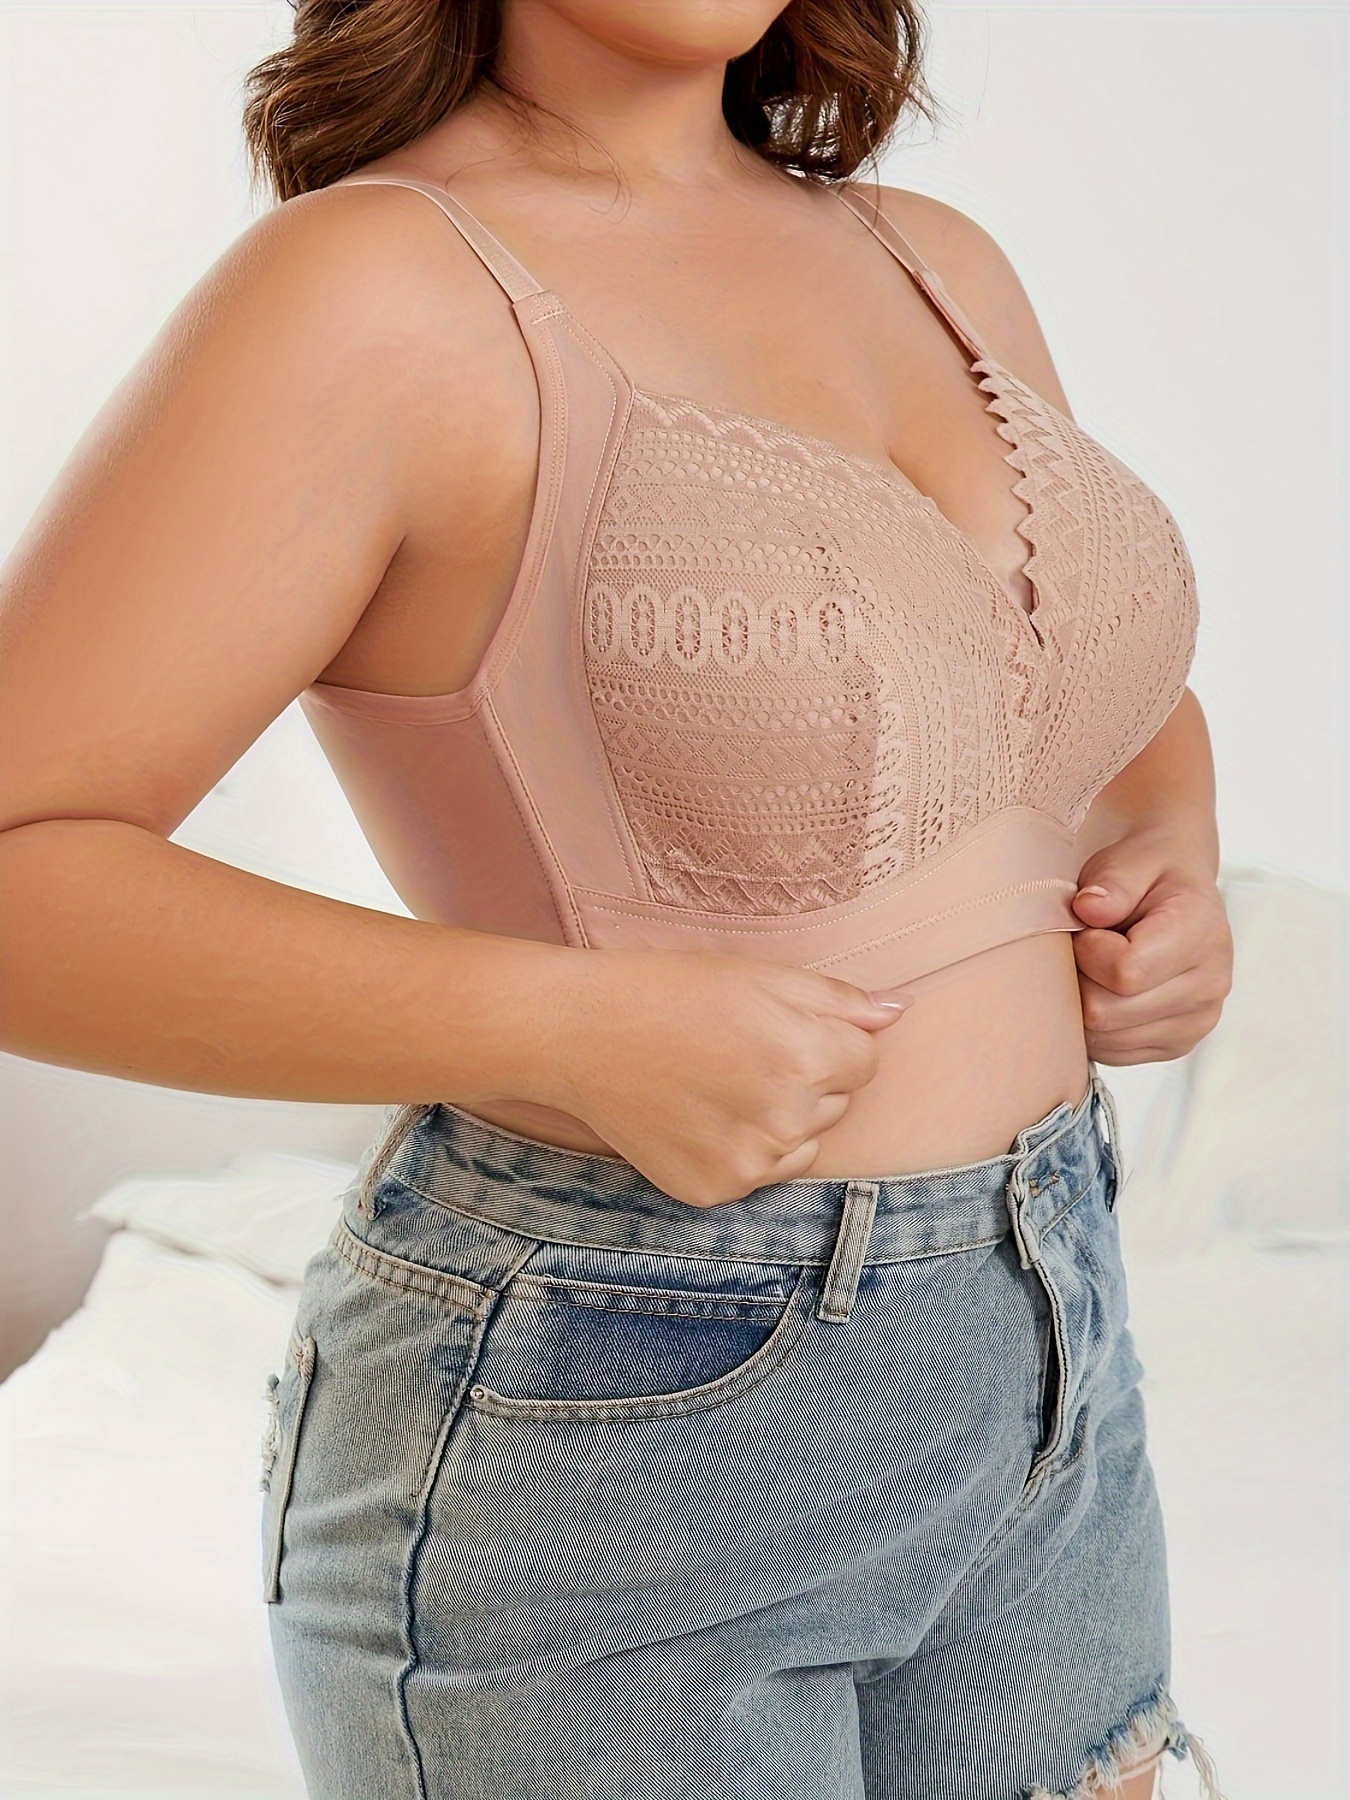 Jerrinut Seamless Push Up Bra For Women Plus Size M XXXL Front Lace Zippers  Bralette BH Brassiere From Maoxuewang, $12.19